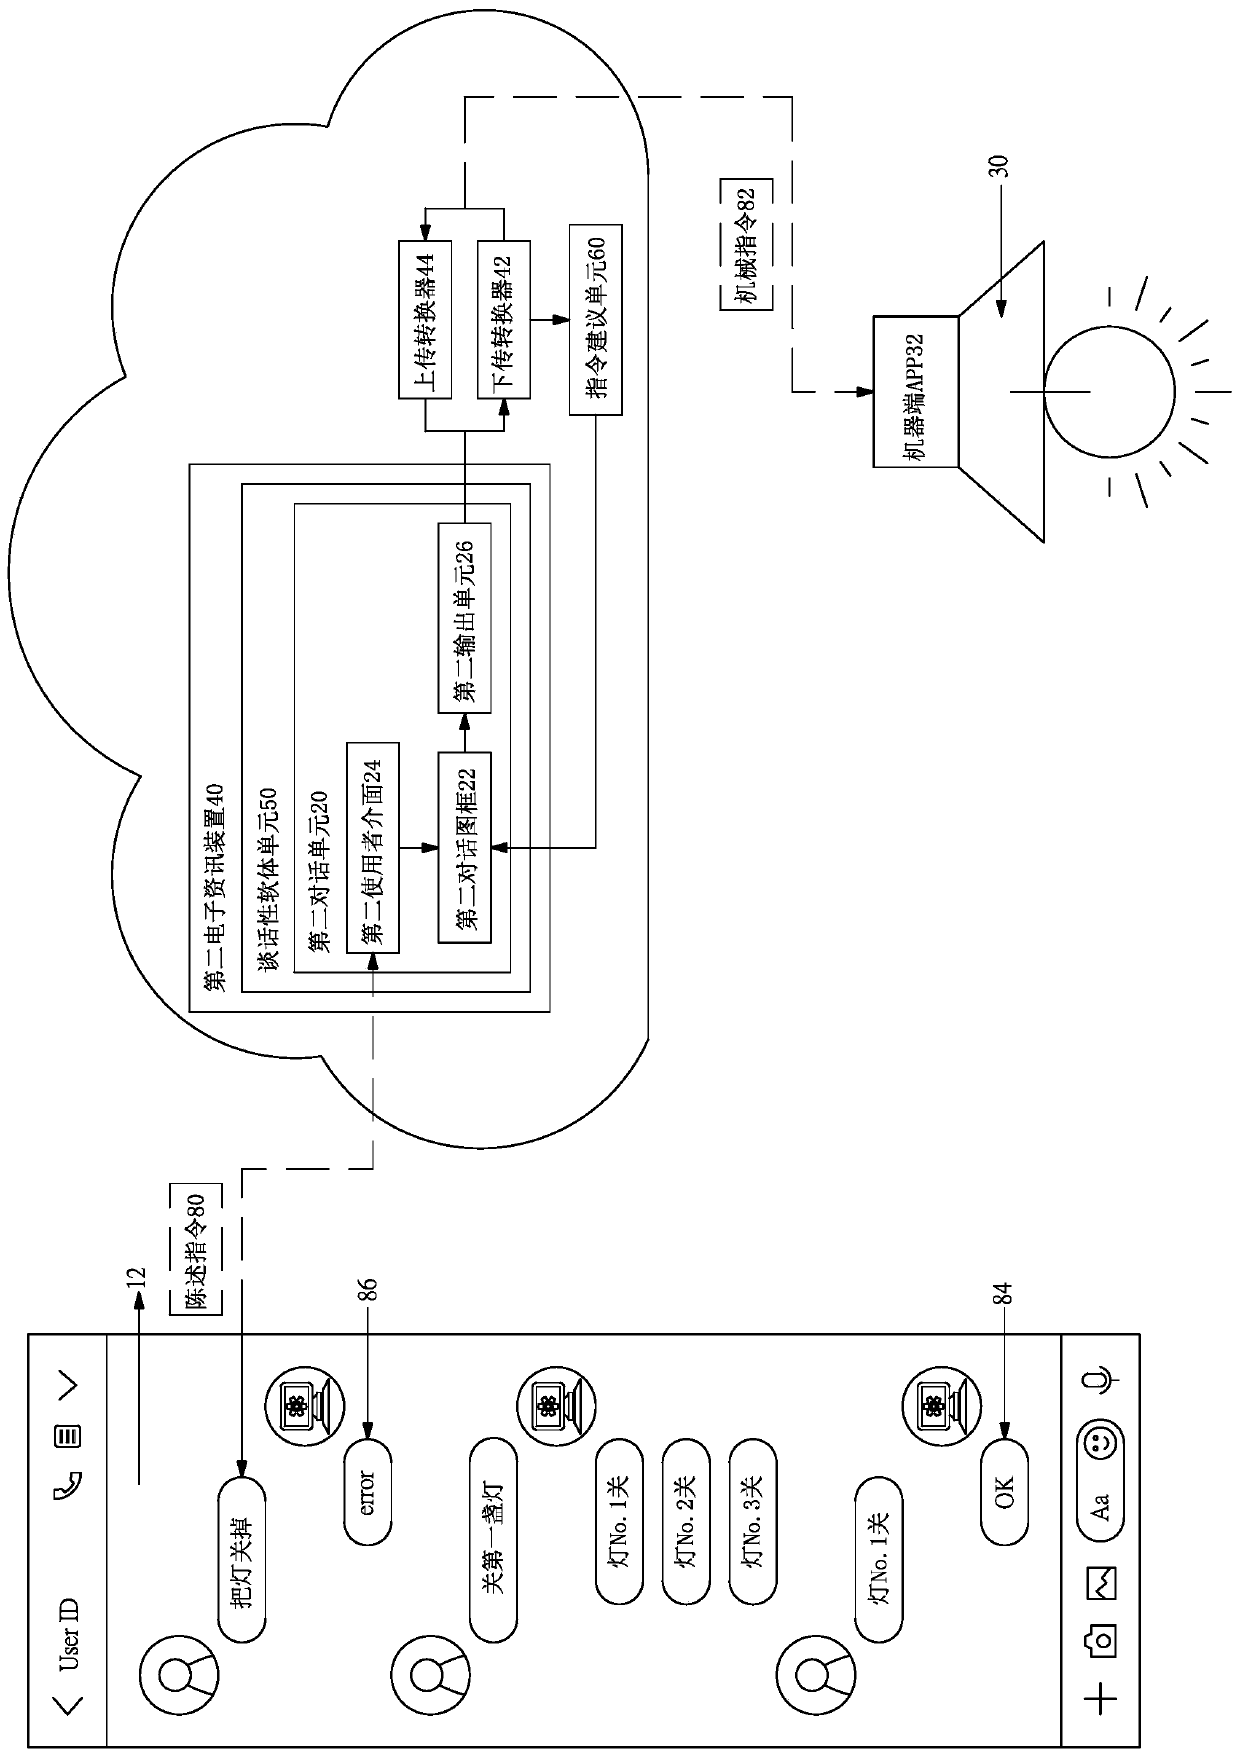 Mechanism for controlling physical machine by using conversational software